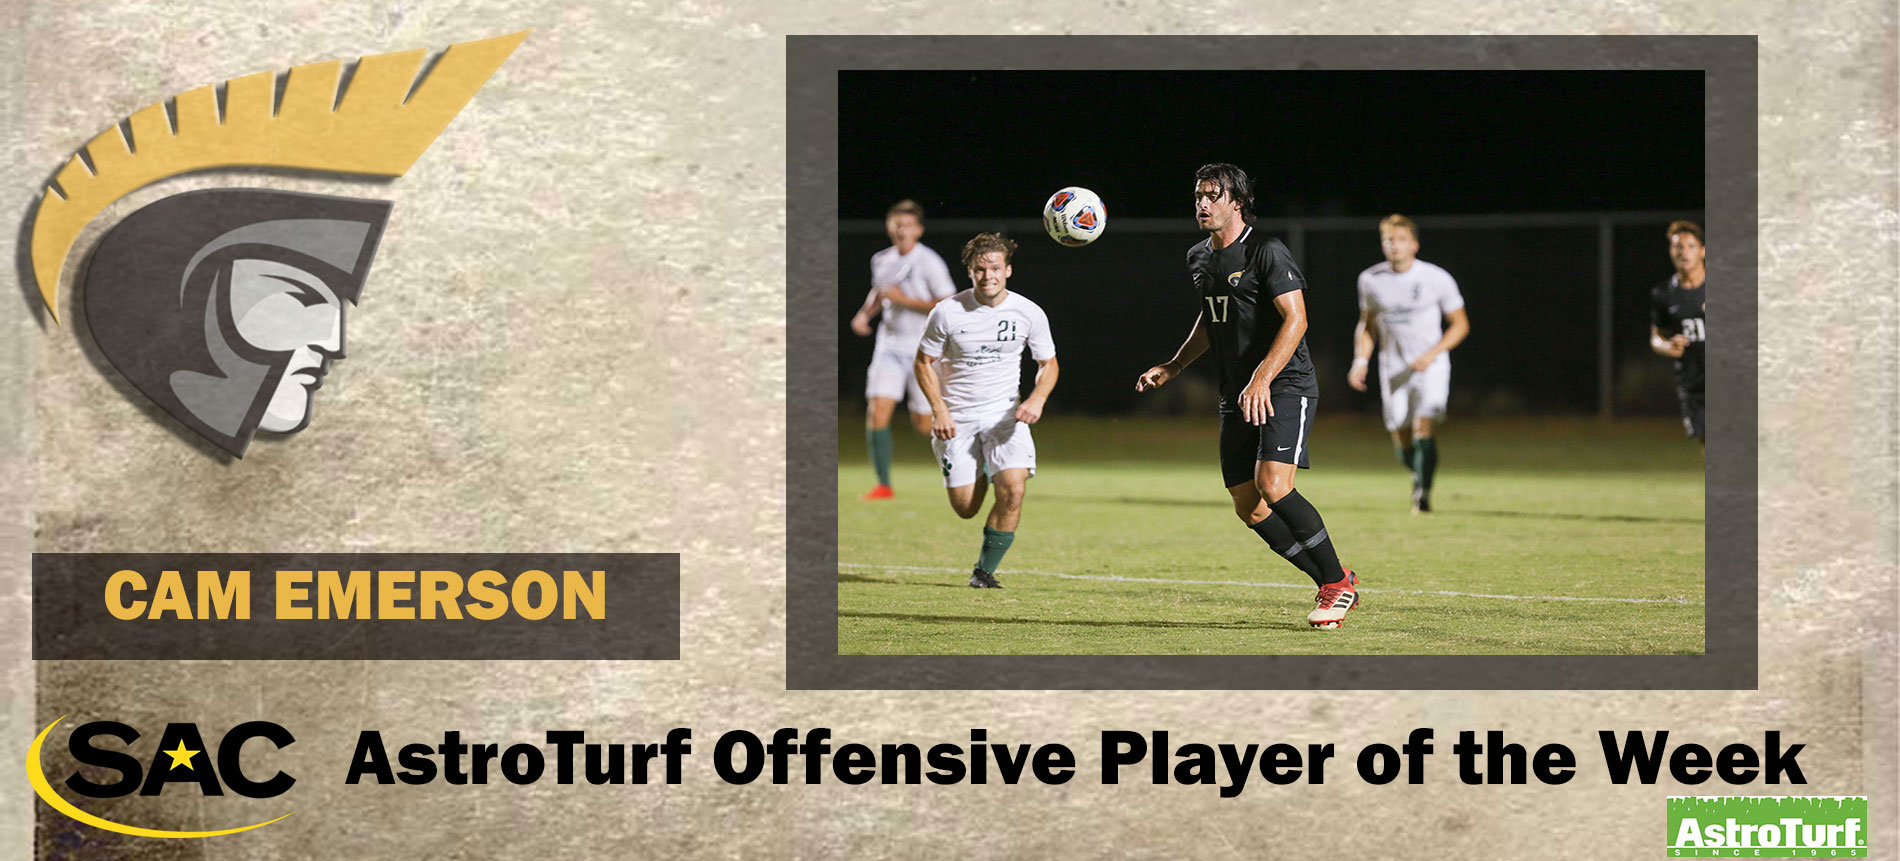 Emerson Earns SAC AstroTurf Offensive Player of the Week